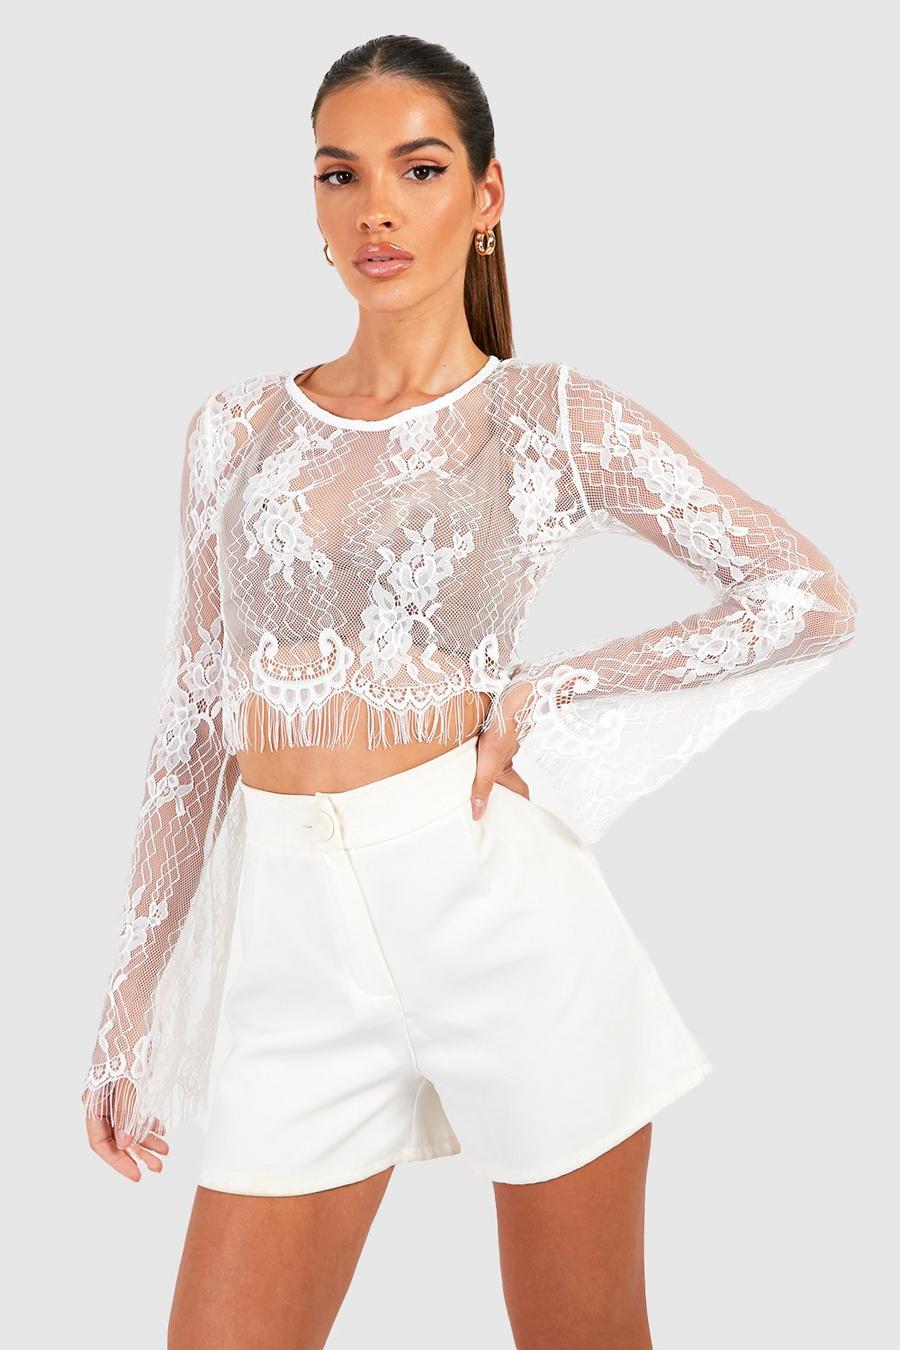 Topshop Long Sleeve Sheer Lace Top In Ivory ASOS, 55% OFF